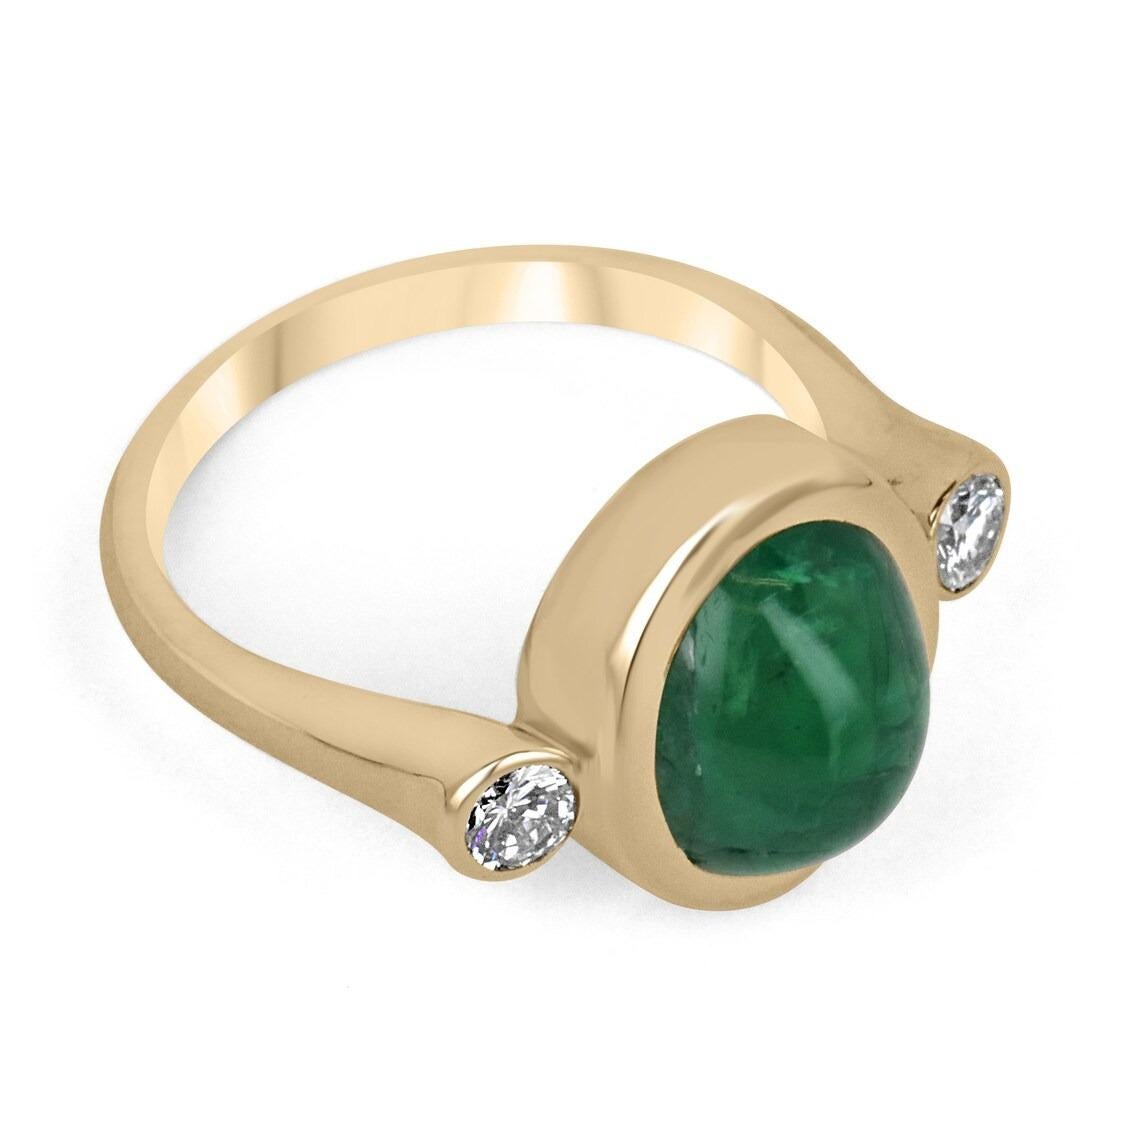 A magnificent emerald cabochon and diamond accent three-stone ring. This remarkable piece features a stunning, high-quality, dark emerald green cabochon emerald. Cut into the shape of an oval, with very good clarity and luster. The center stone is